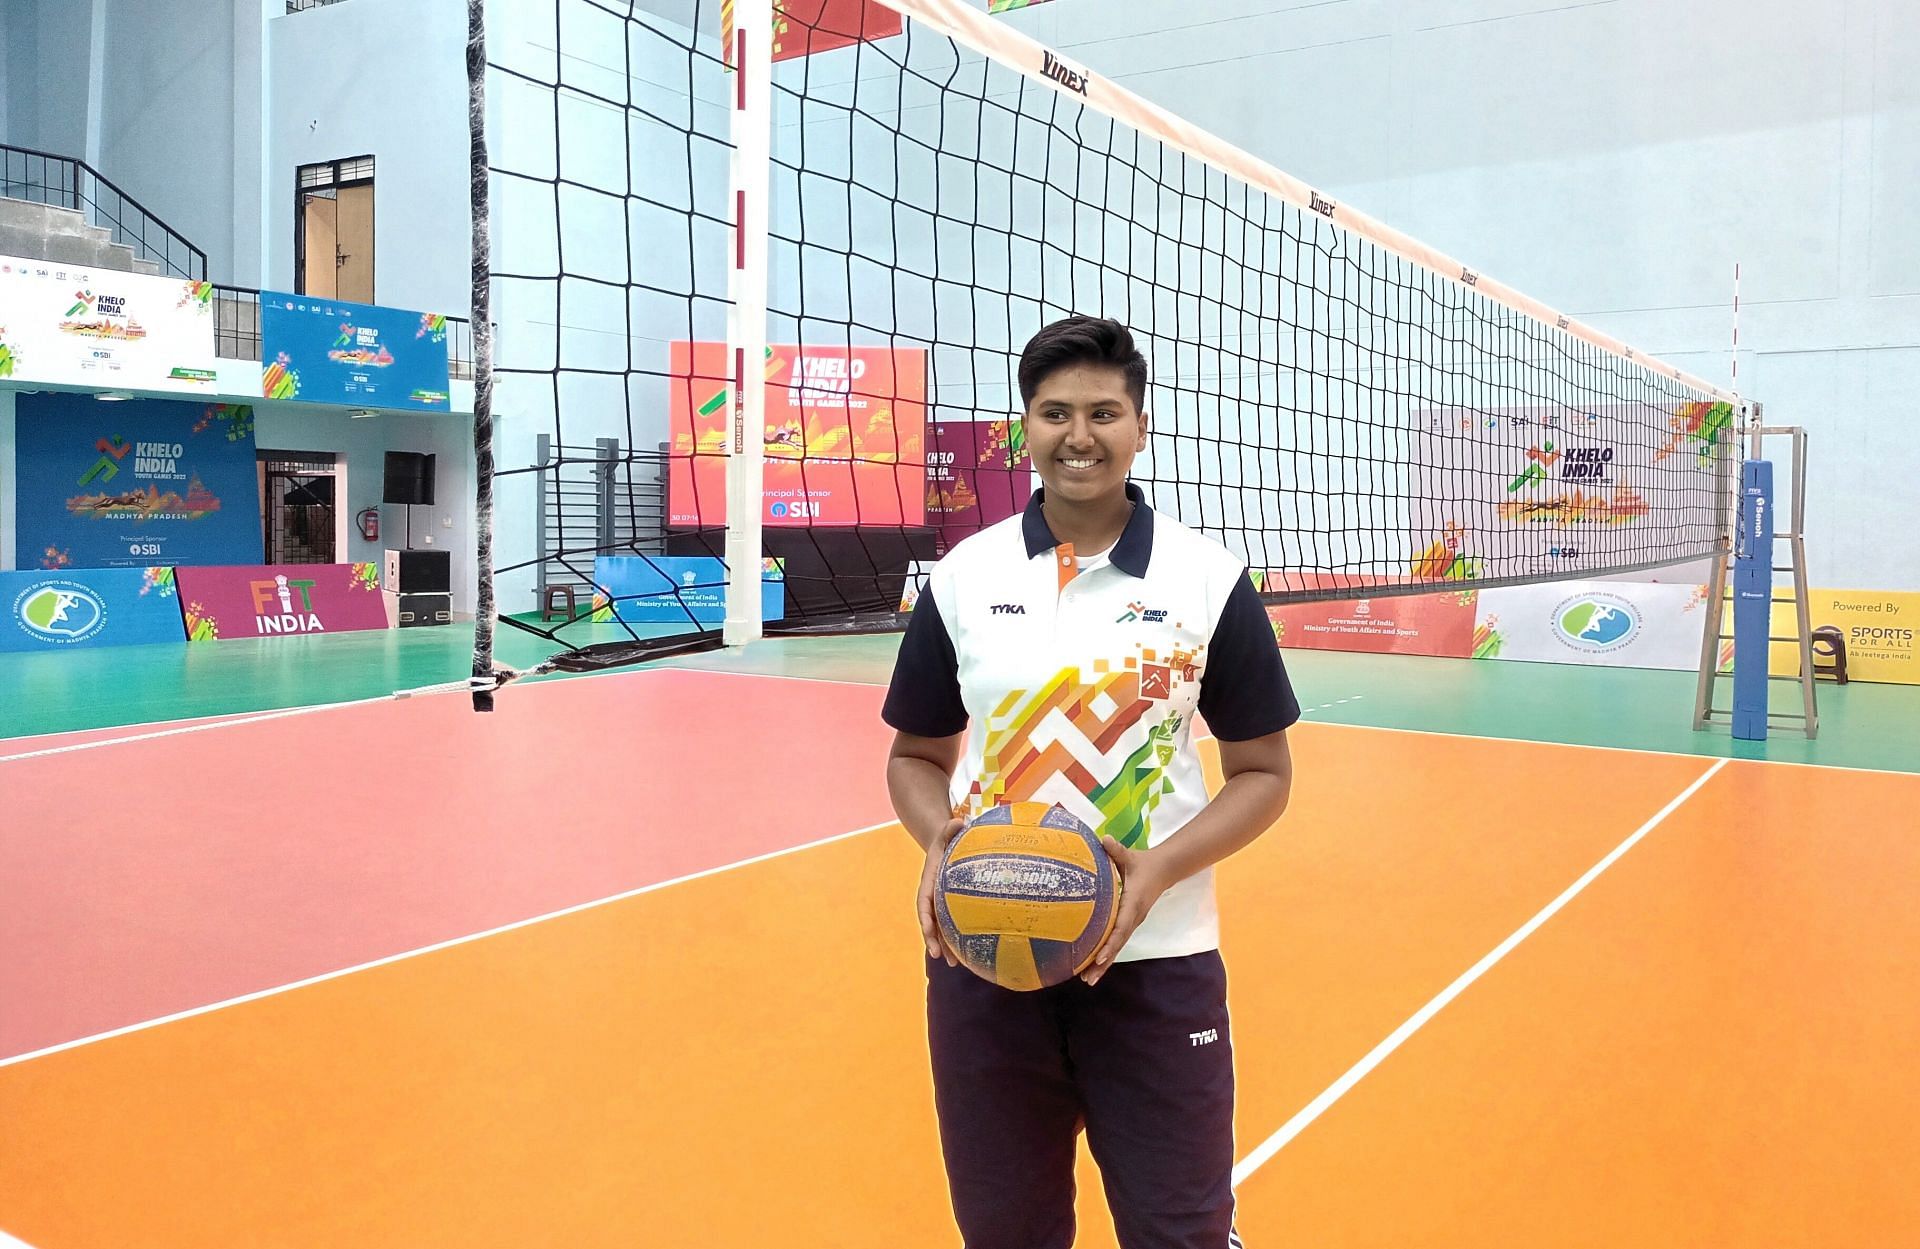 Minnat Zarin after her volleyball match at the Khelo India Youth Games 2022 in Bhopal. Photo credit Navneet Singh